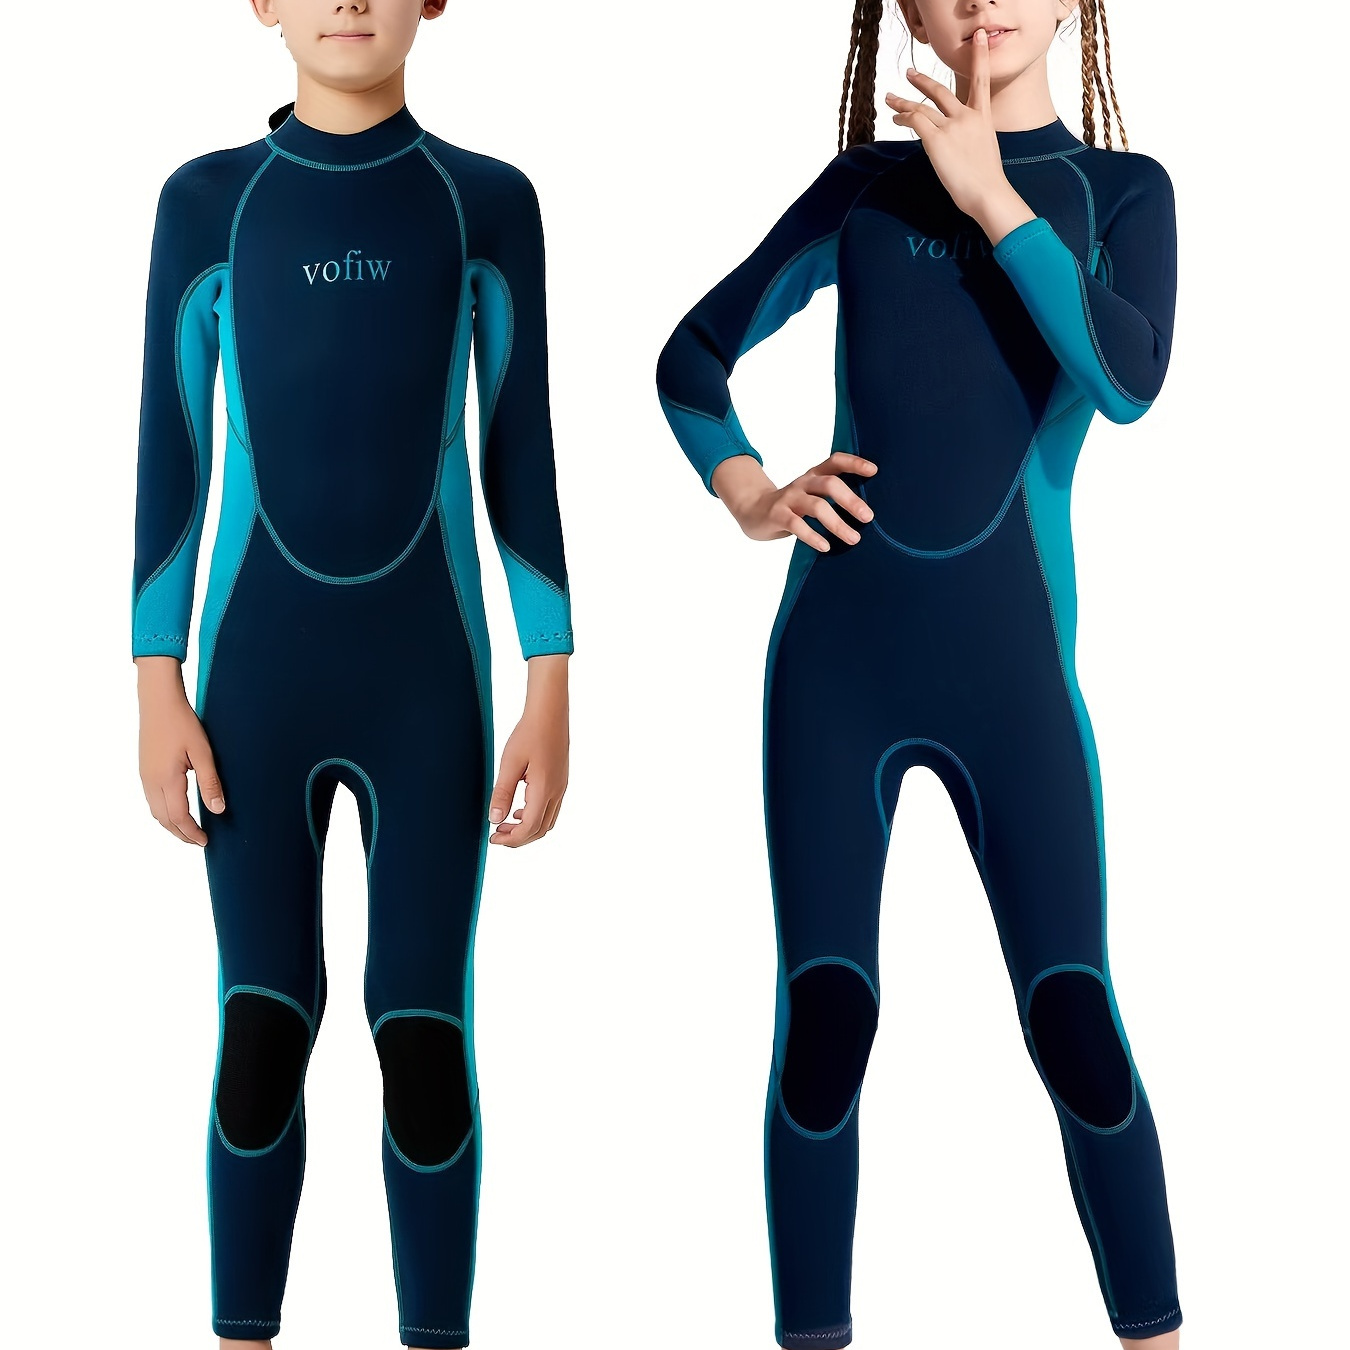 

Boys Color Block Wetsuit, Long Sleeve Full Body Suit, Sun Protection & Warm Swimsuit For Swimming, Surfing, Aquatic Gear For Boys & Girls